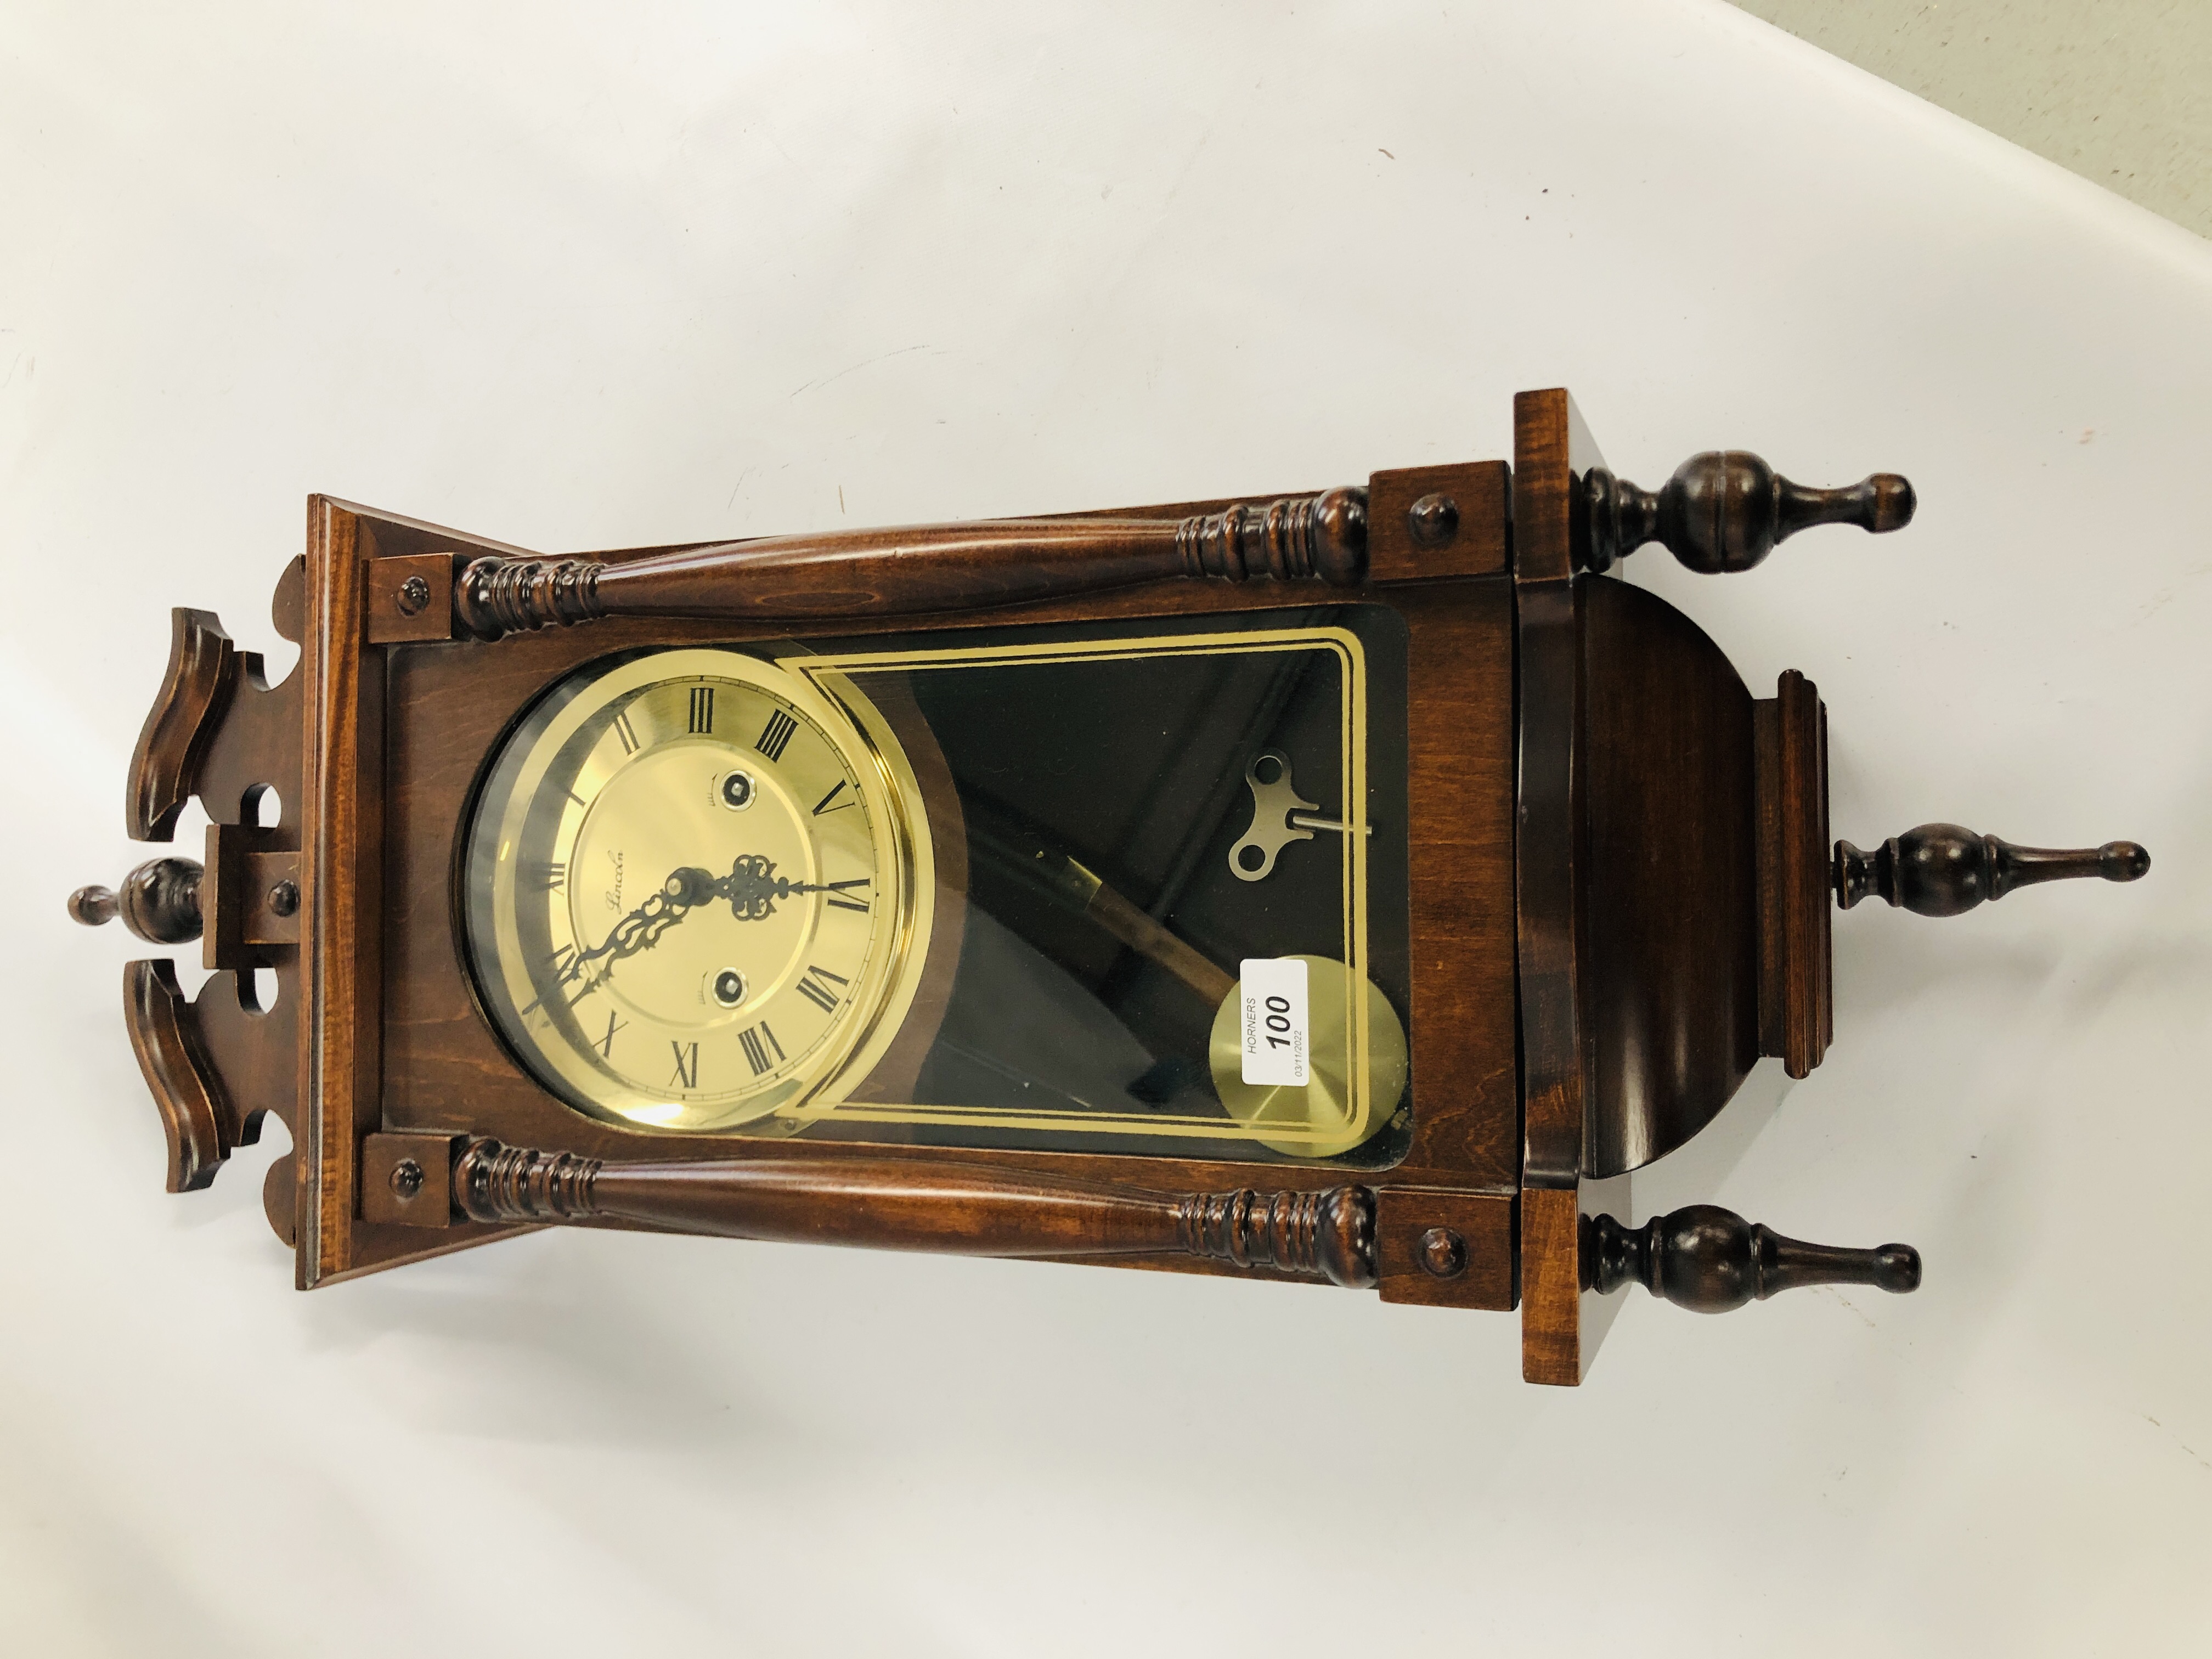 MODERN MAHOGANY FINISH MANTEL CLOCK ALONG WITH TWO WALL CLOCKS ONE MARKED LINCOLN THE OTHER WILLIAM - Image 6 of 6